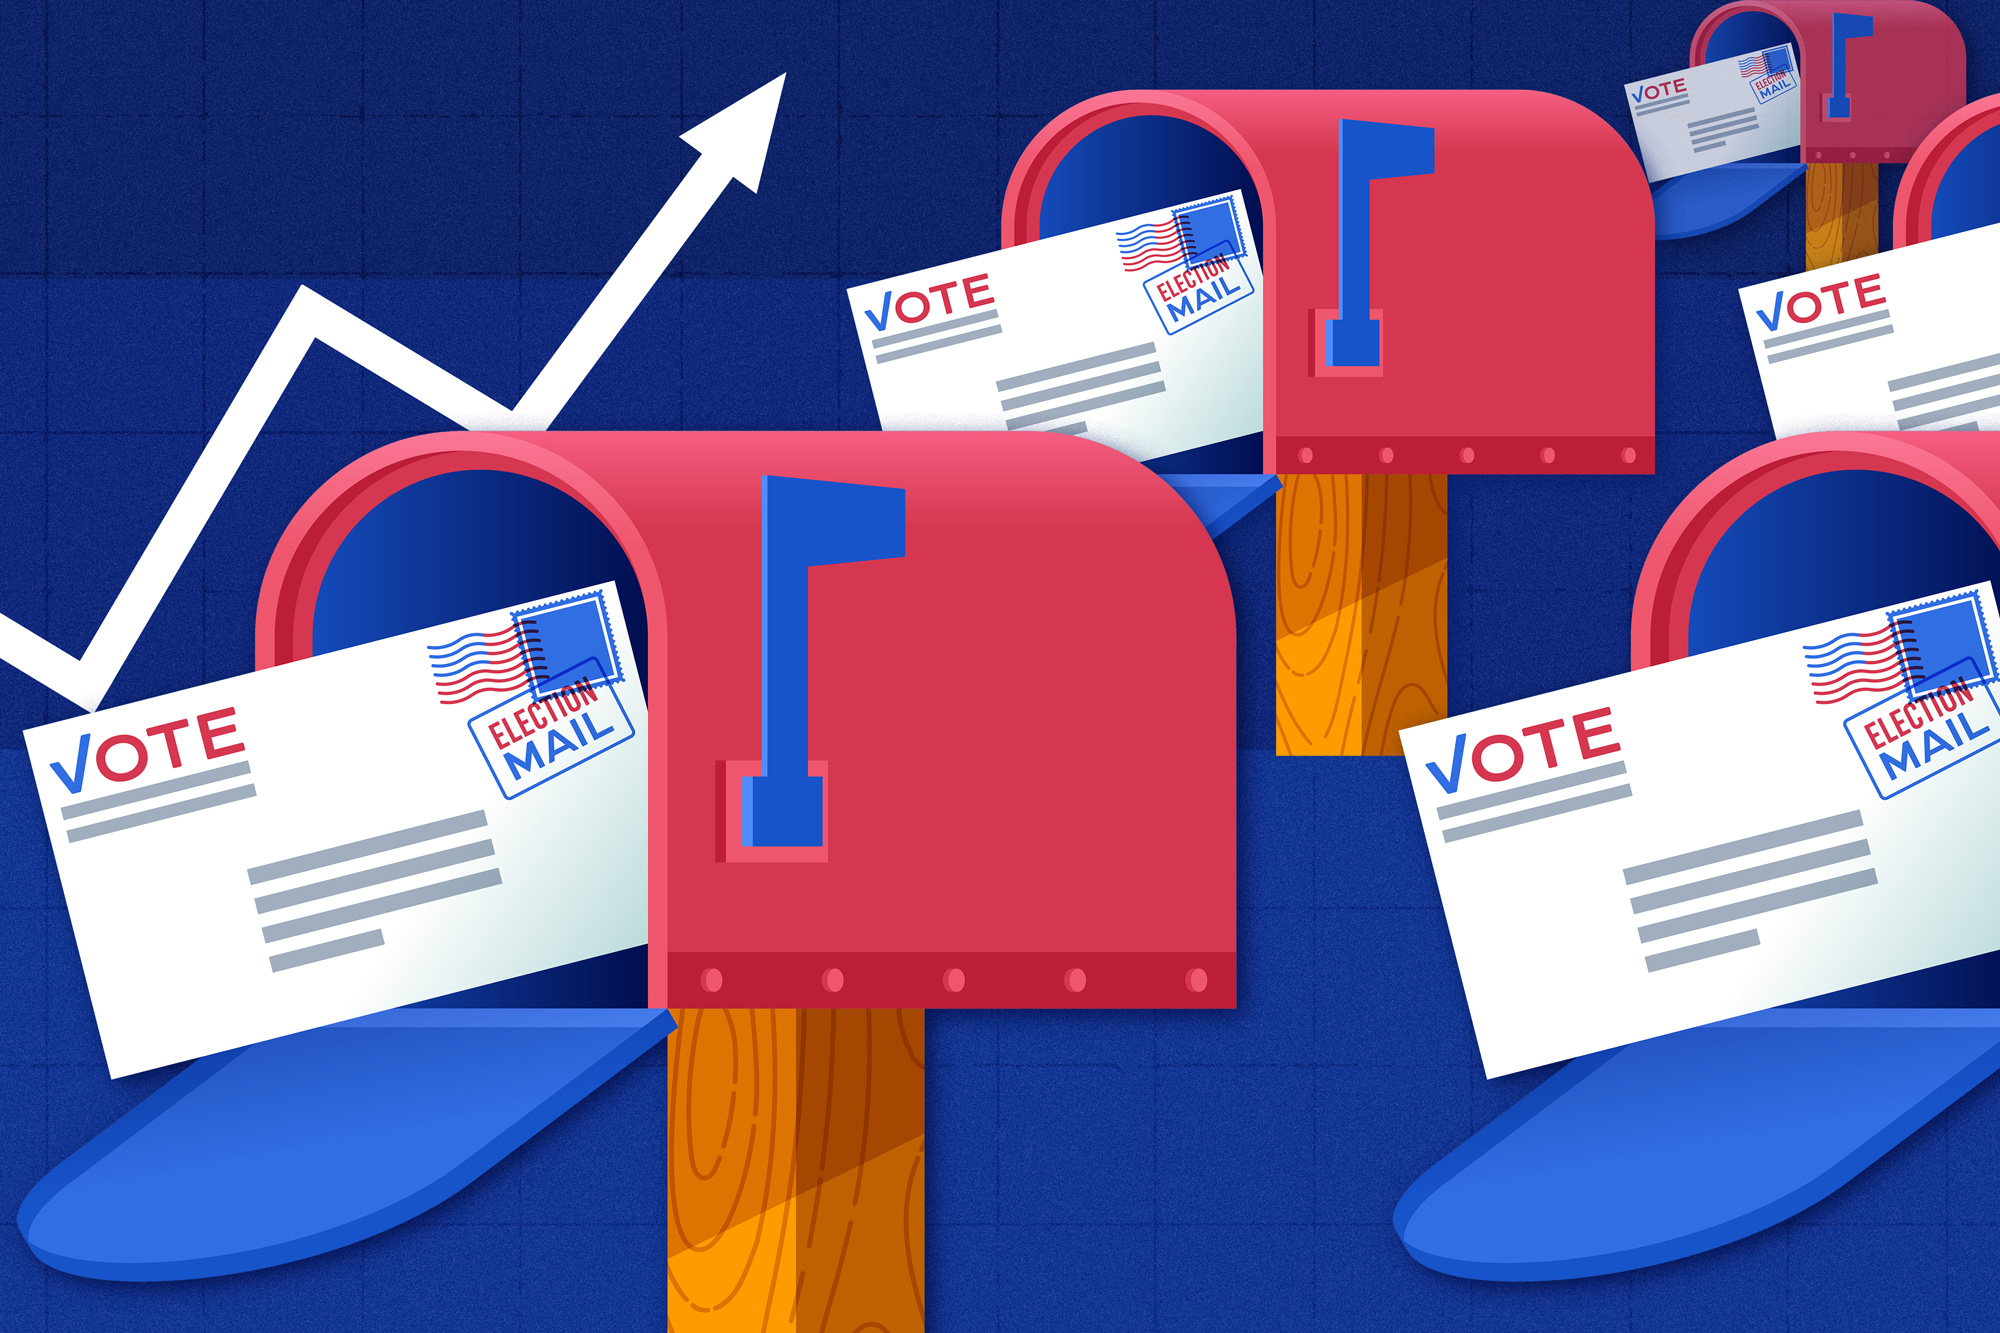 Study Shows That Increased Voting by Mail Does Not Reduce the Security of U.S. Elections